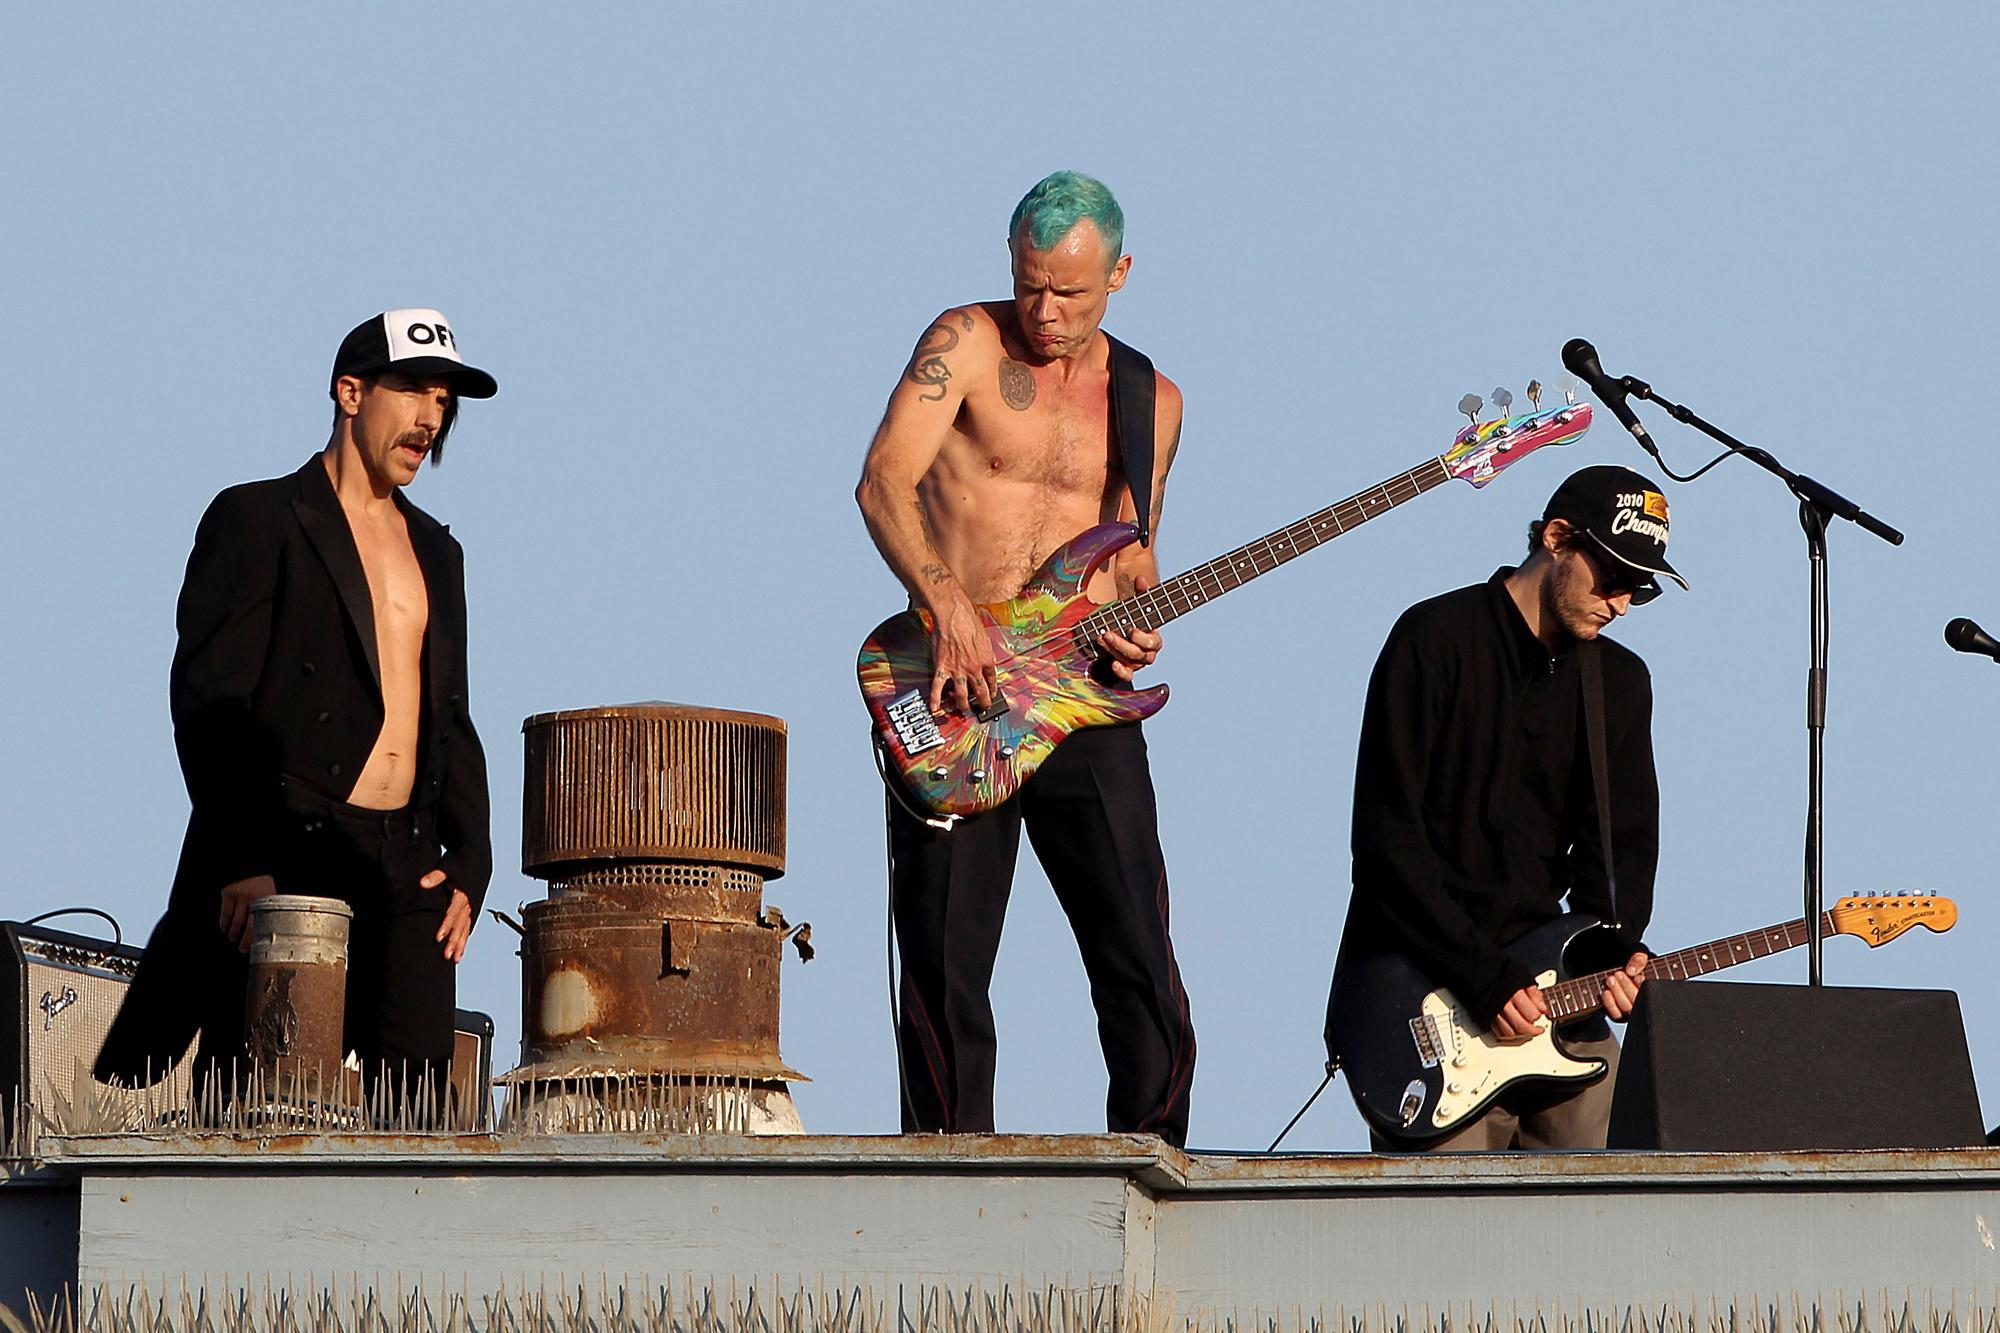 RHCP Are My Life on Twitter: "Pic from "The Adventures Of Rain Dance video July 2011 #redhotchilipeppers #rhcp *http://t.co/WRmBPLjNTy* http://t.co/Nj0AVshw1R" / Twitter